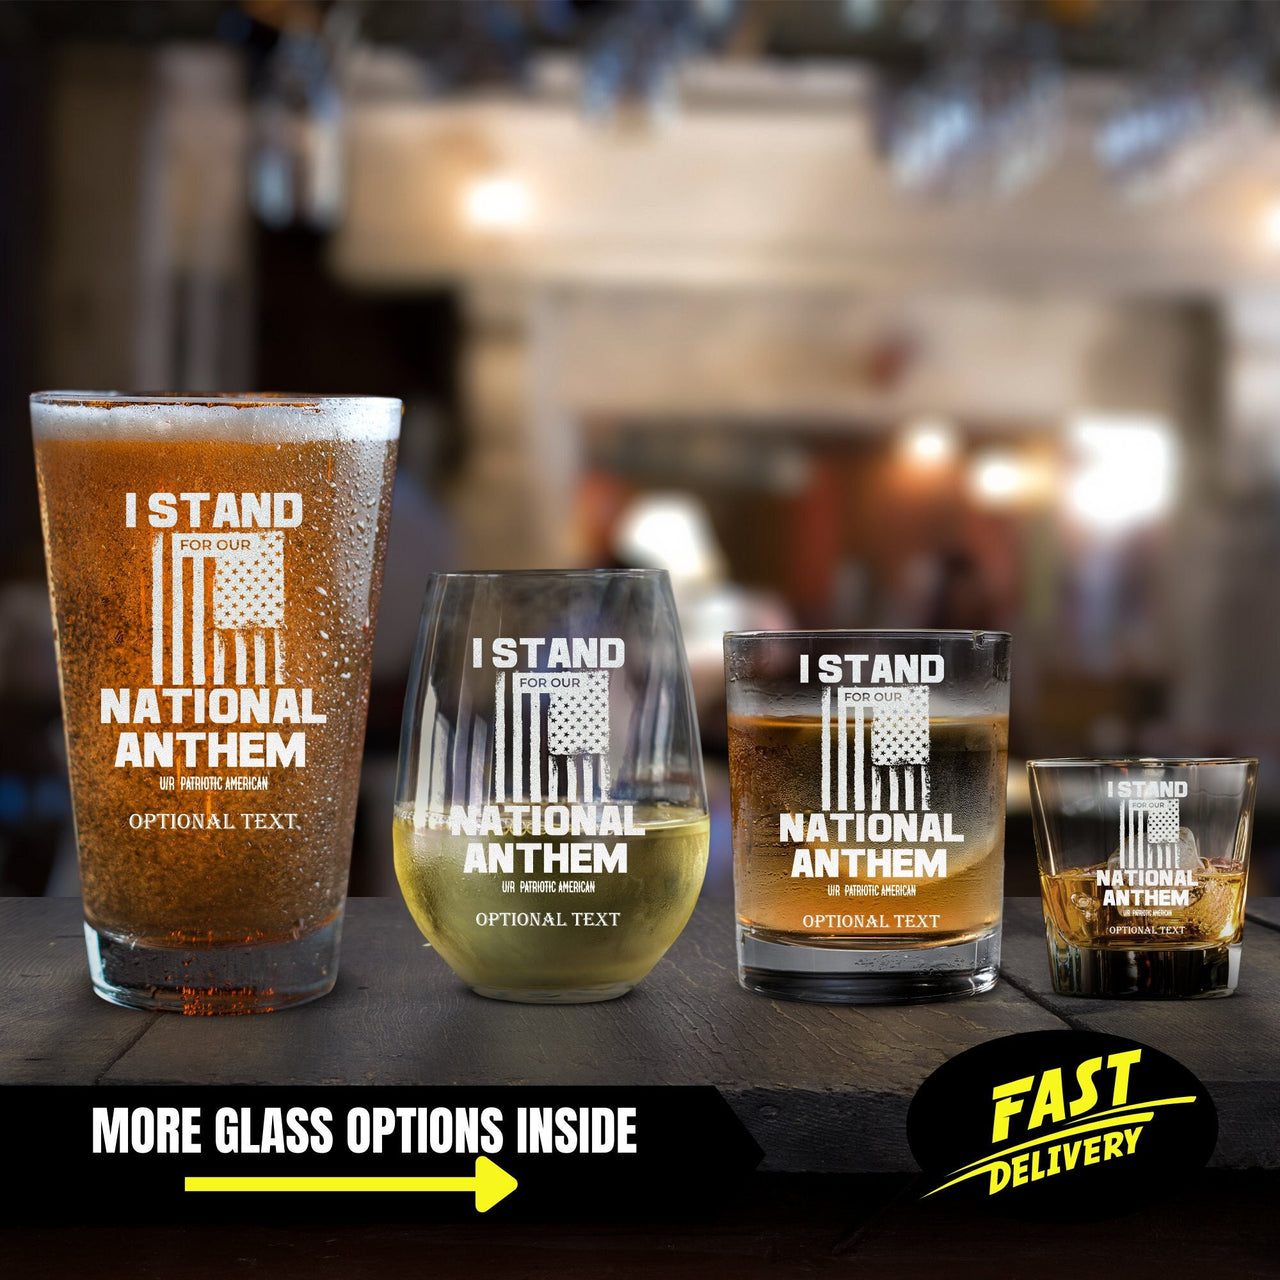 I Stand for Our National Anthem Patriotic Anthem Glassware, American Flag Glass Design, USA 4th of July Gift Beer, Whiskey, Shot, Cube Glass